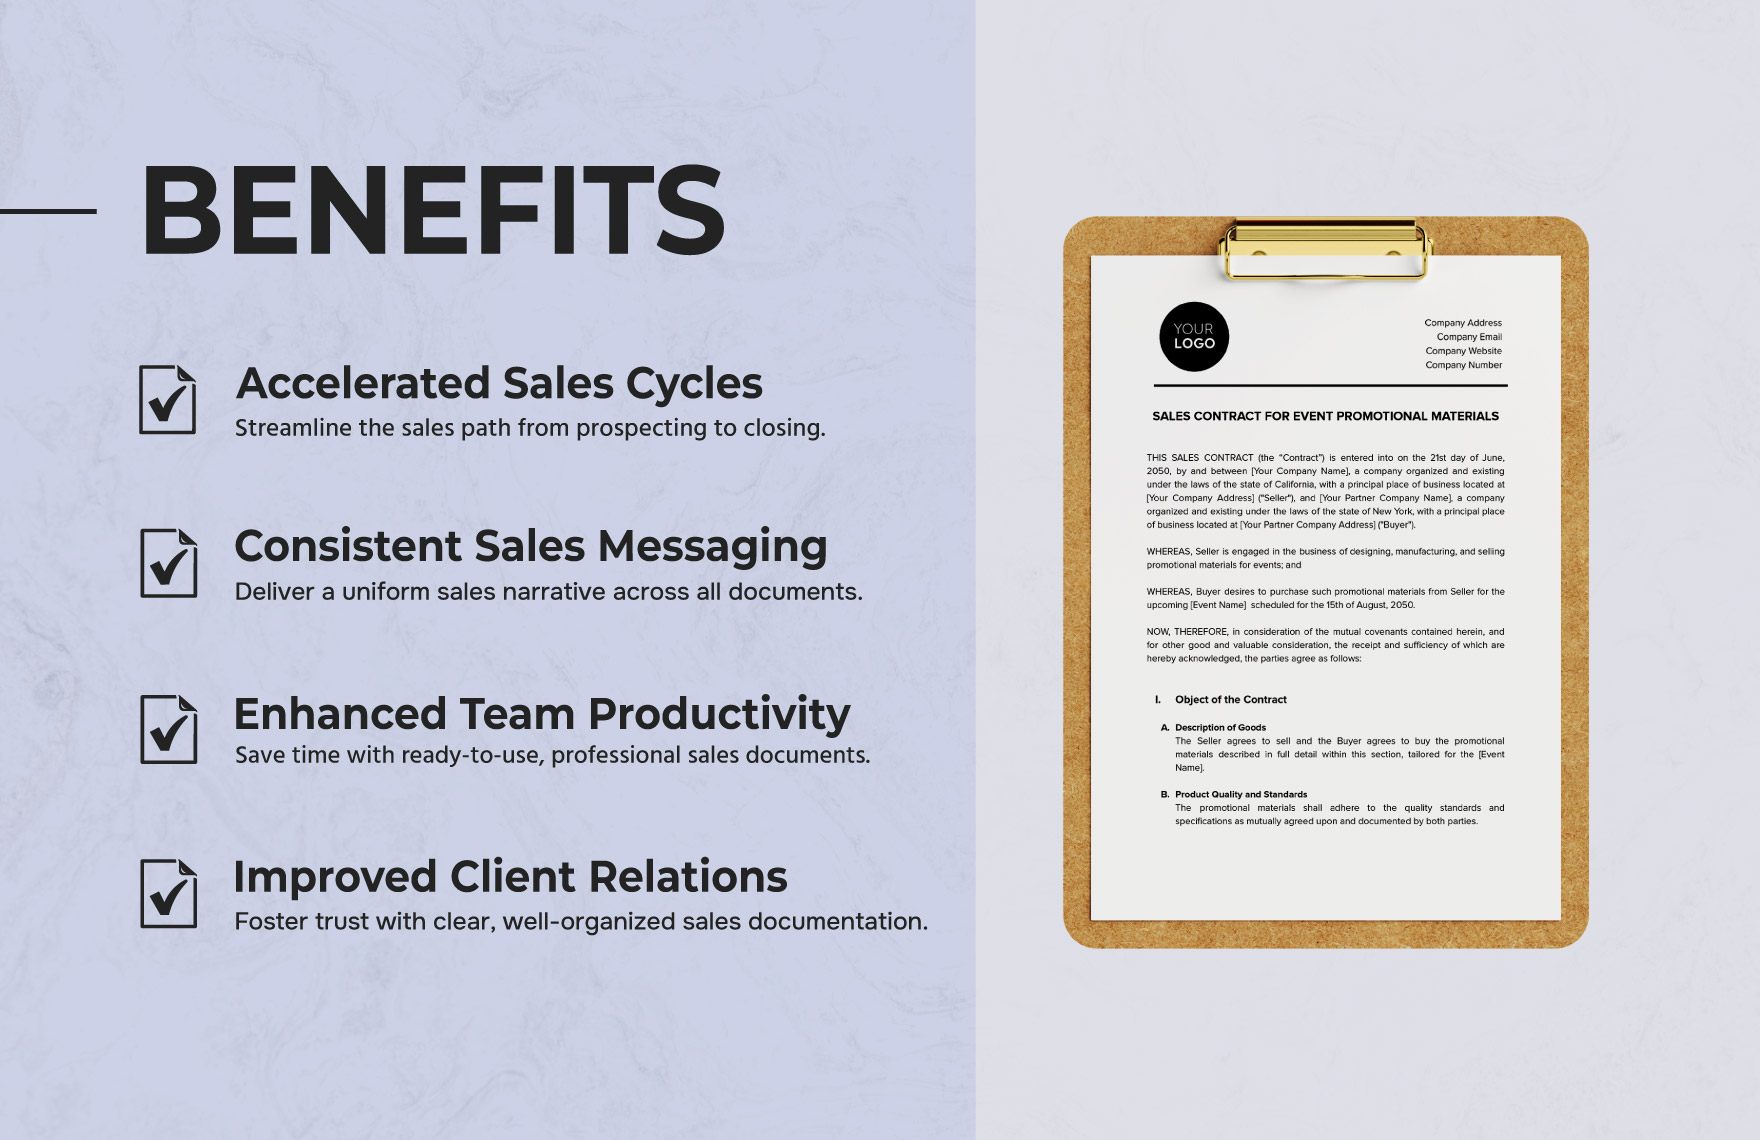 Sales Contract for Event Promotional Materials Template